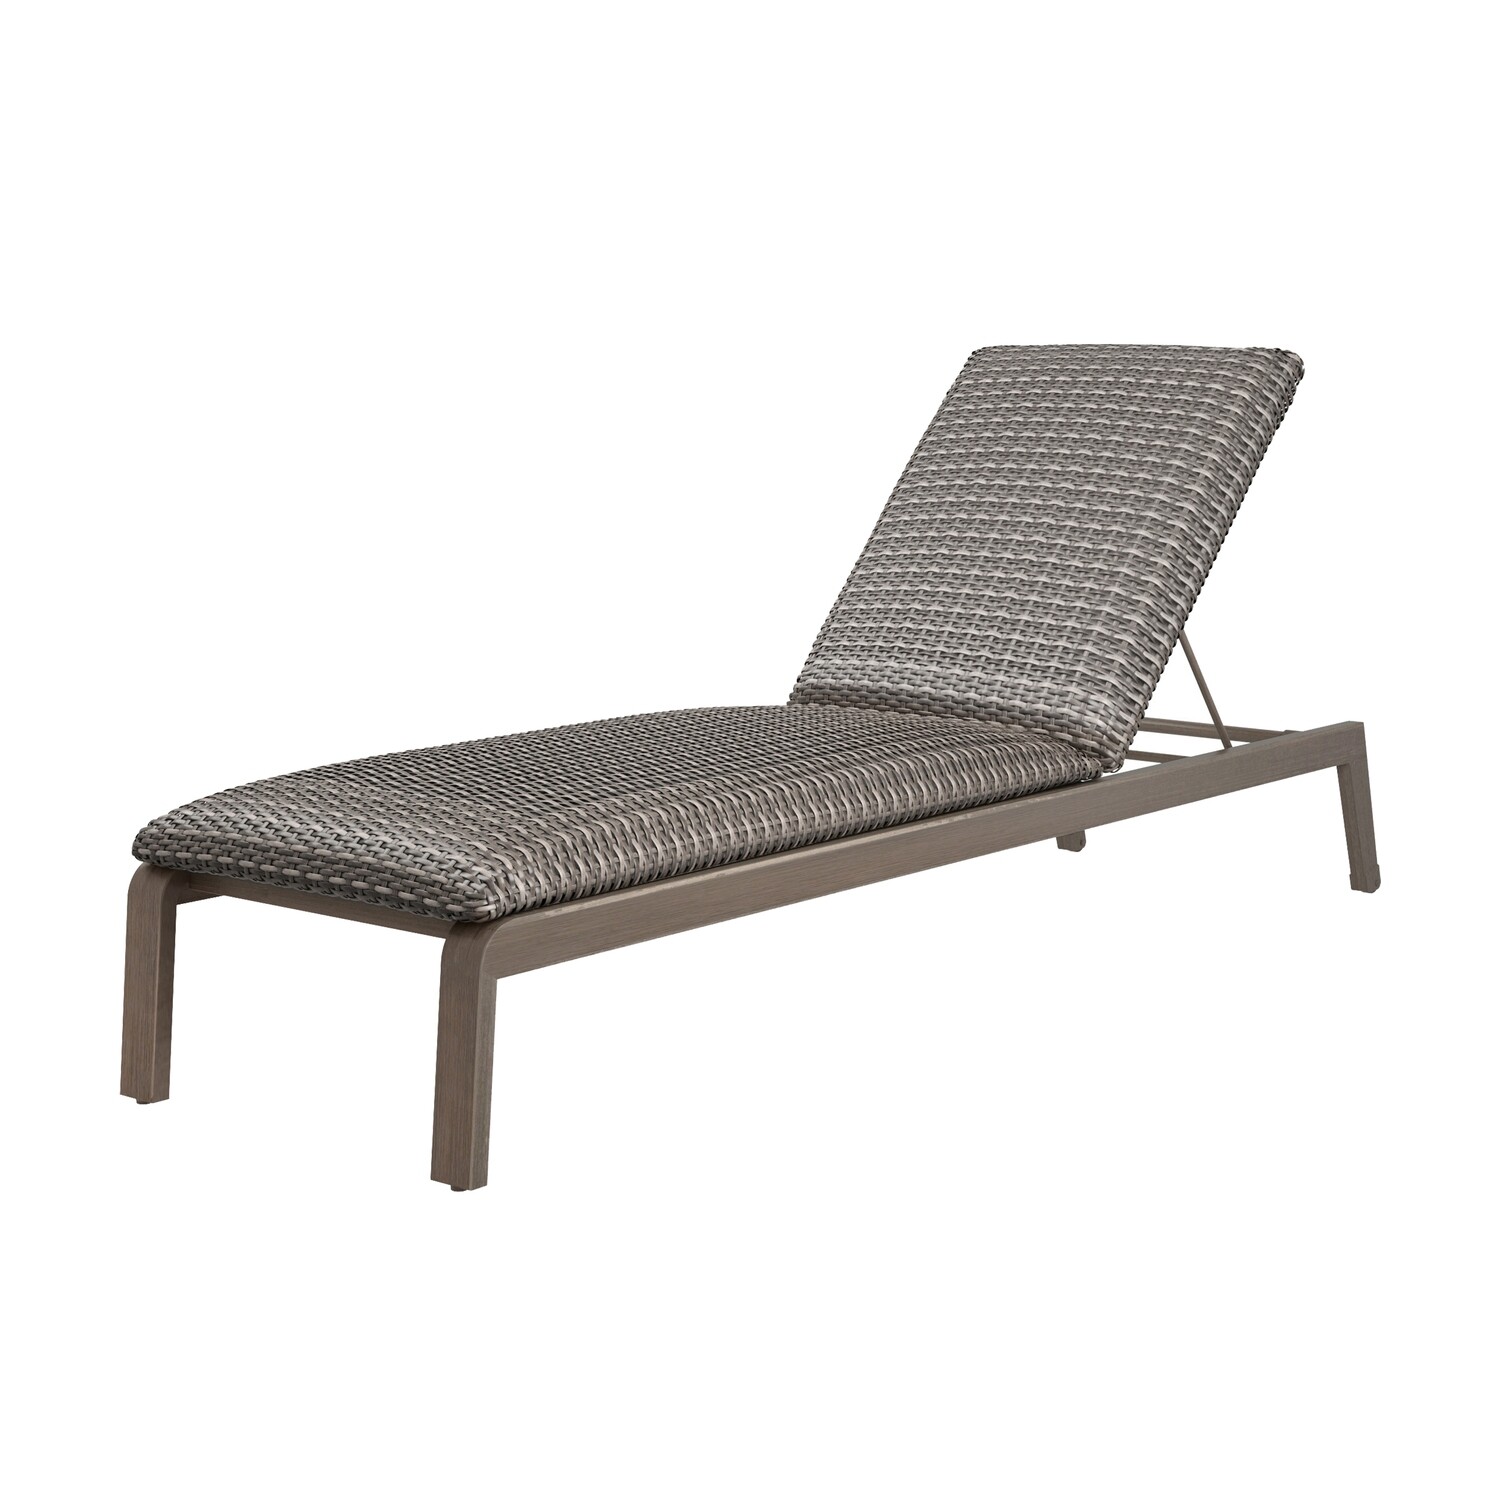 Canton Padded Wicker Aluminum Adjustable Chaise Lounge with Wheels